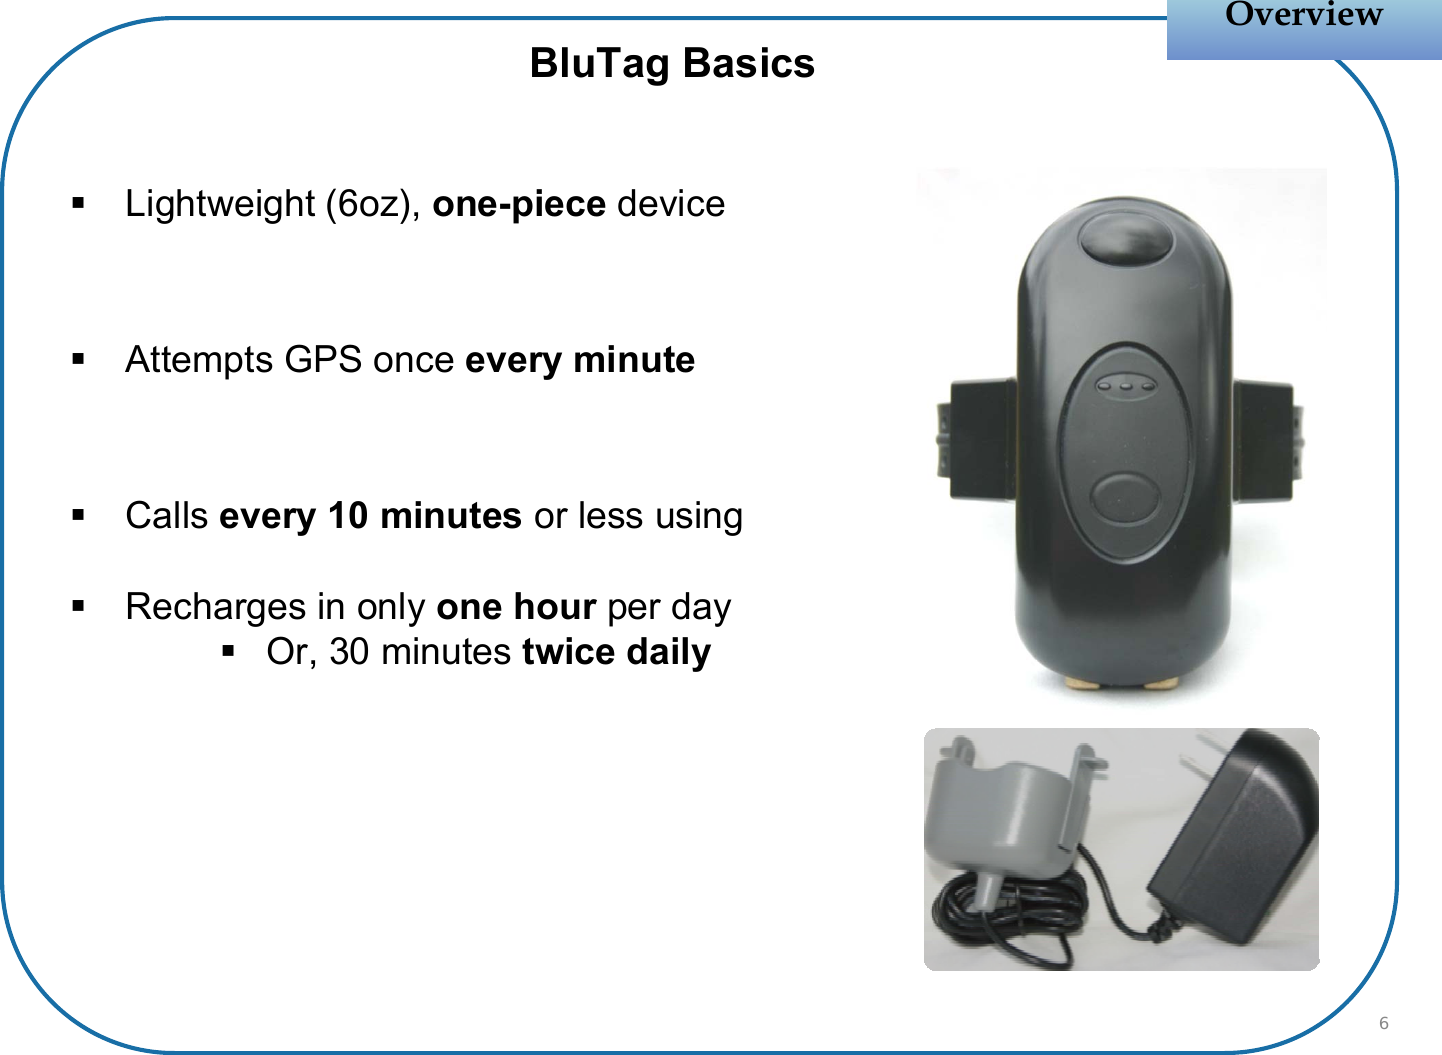 Lightweight (6oz), one-piece deviceAttempts GPS once every minuteCalls every 10 minutes or less usingRecharges in only one hour per dayOr, 30 minutes twice dailyOverviewOverviewBluTag Basics6